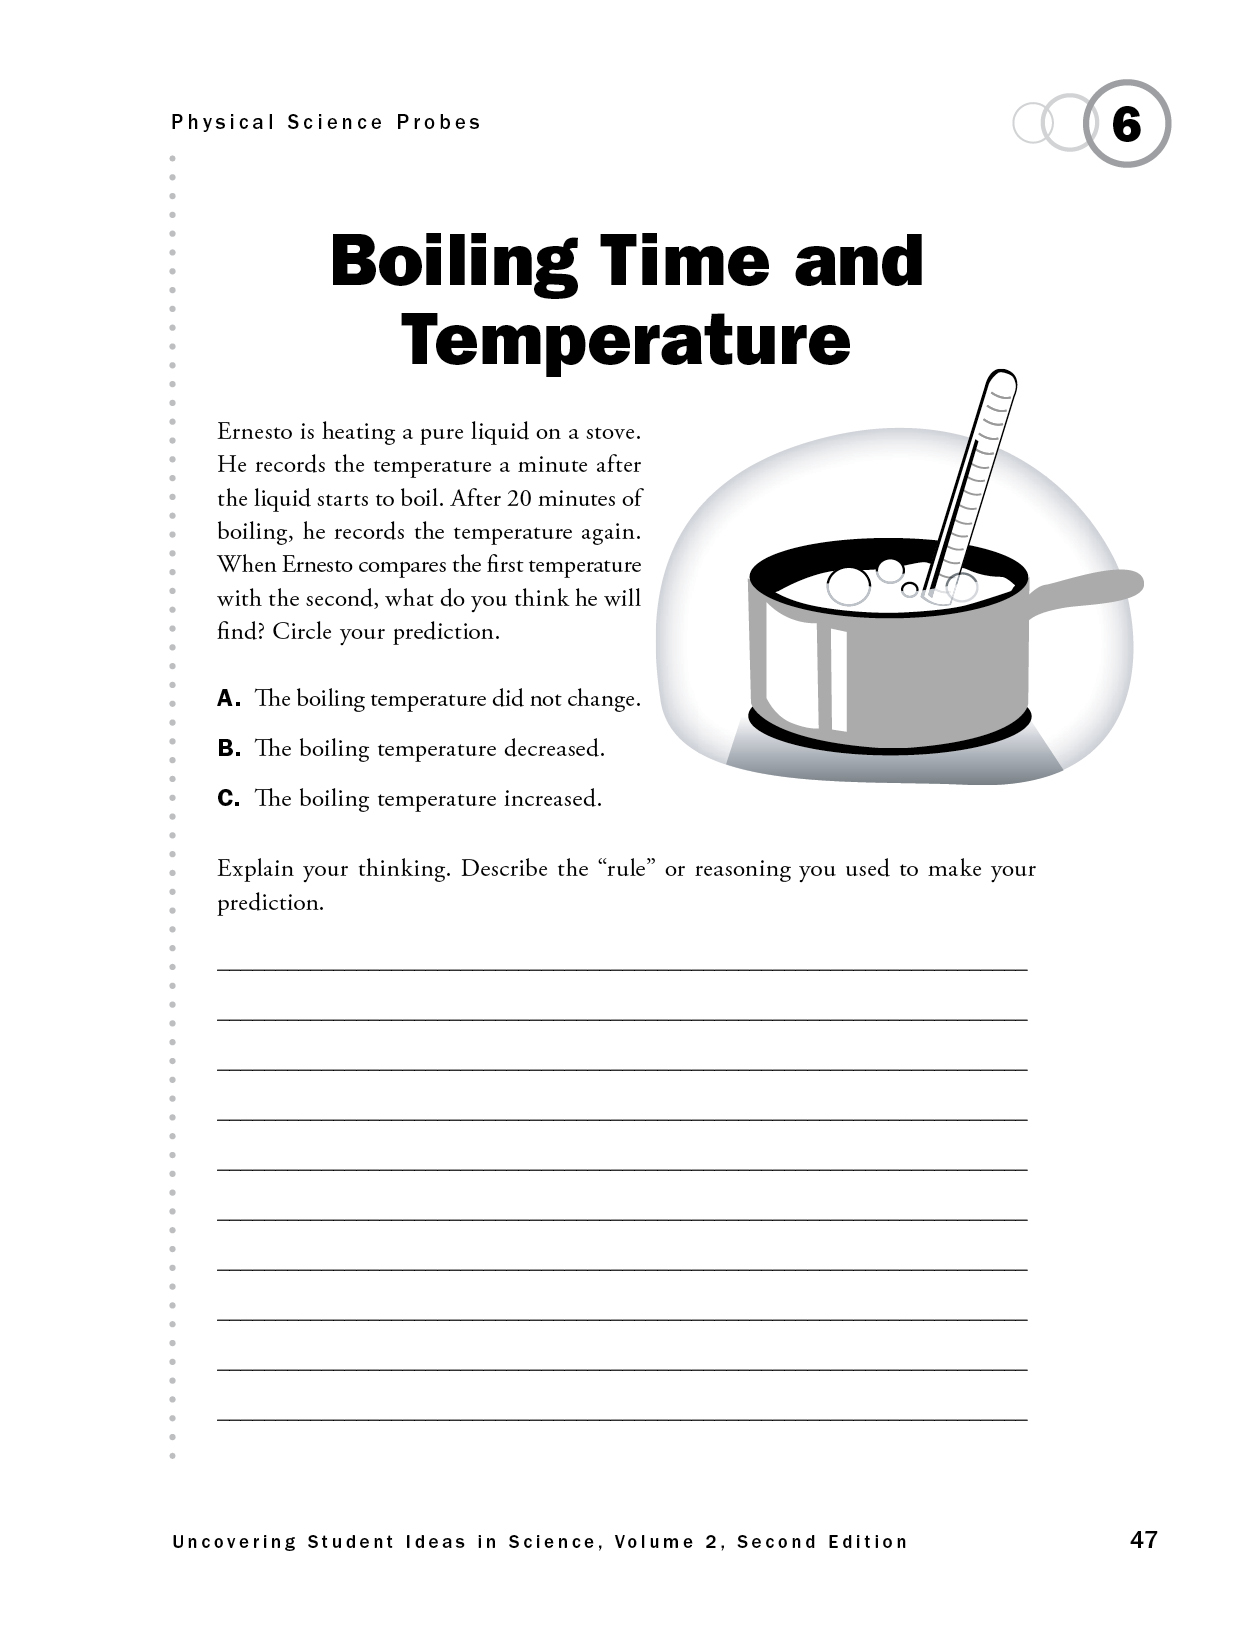 Boiling Time and Temperature